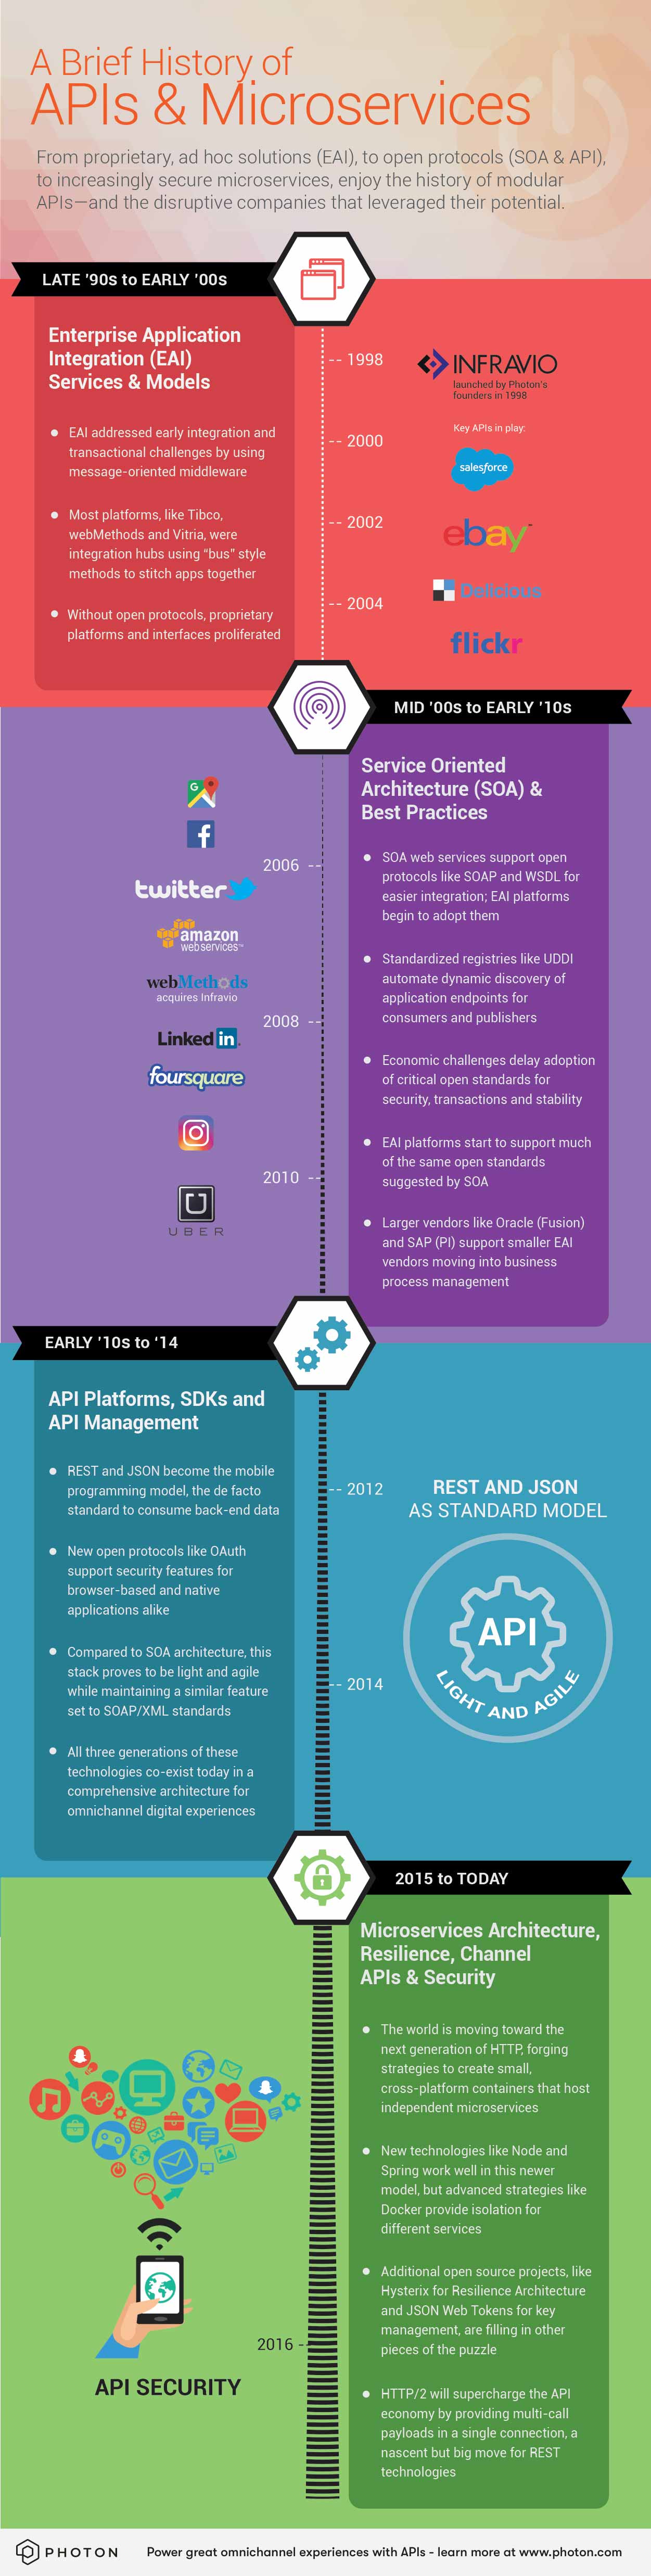 A Brief History of APIs & Microservices